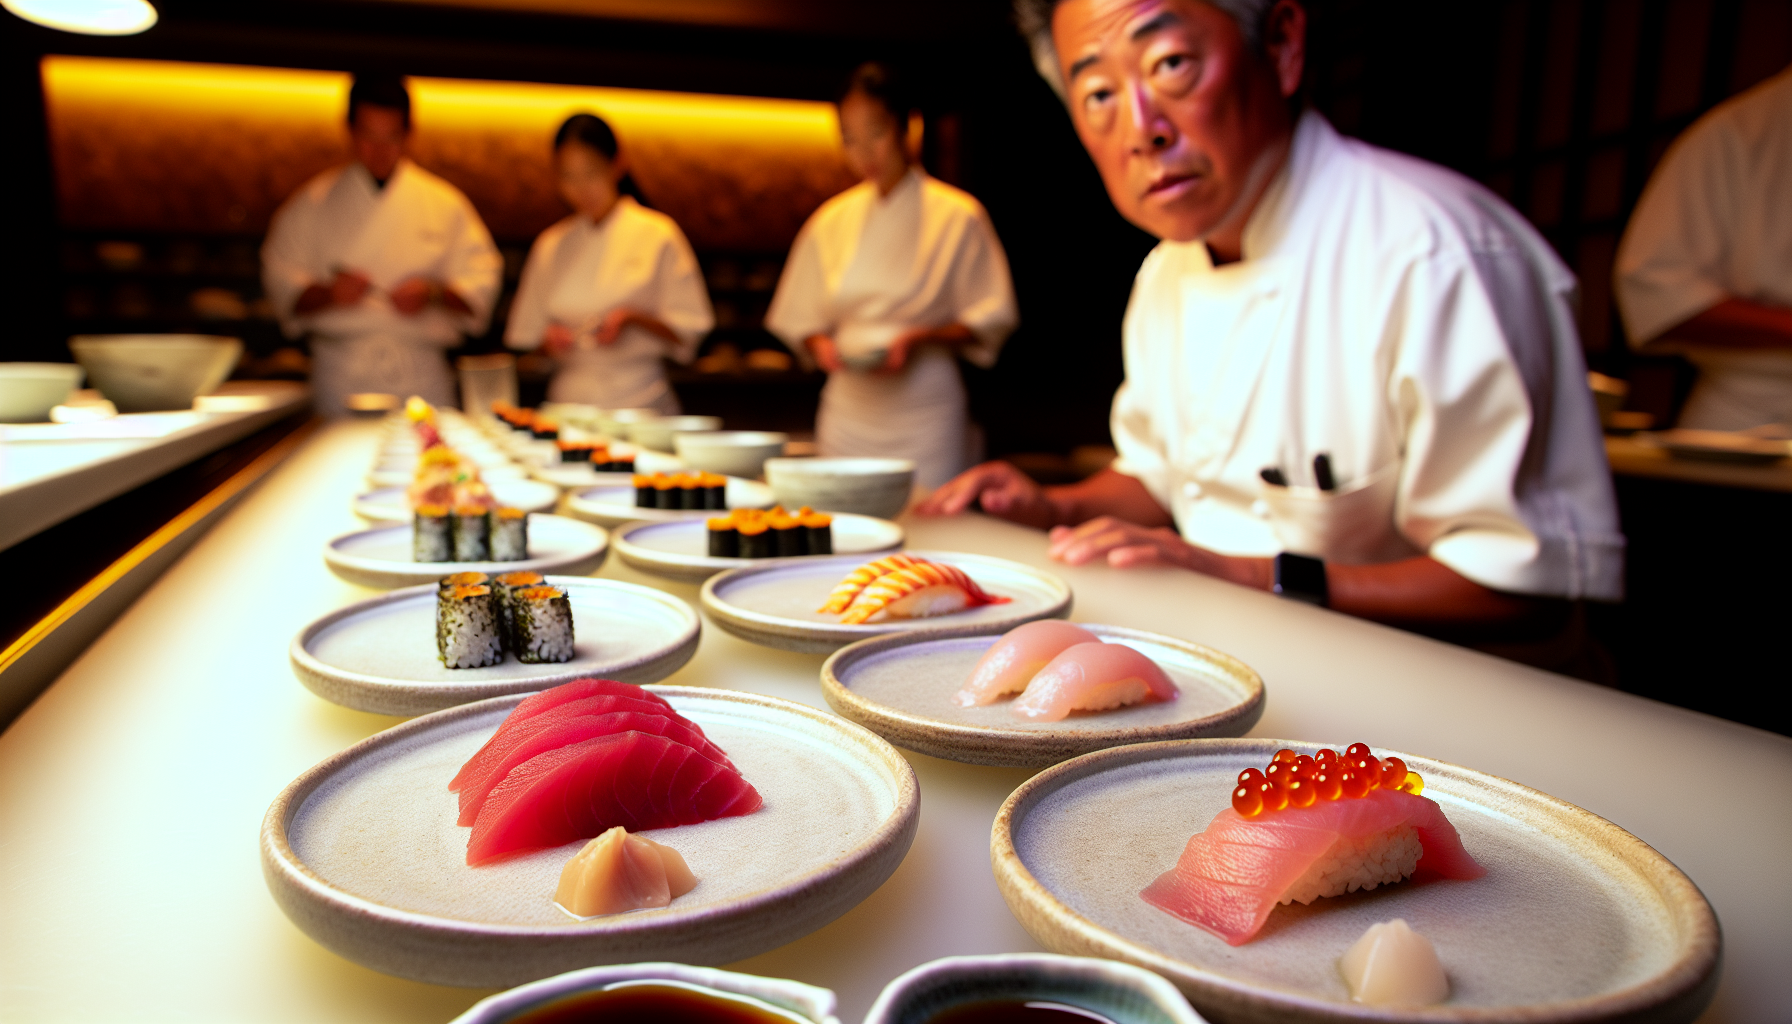 Exquisite omakase dining experience with beautifully plated dishes